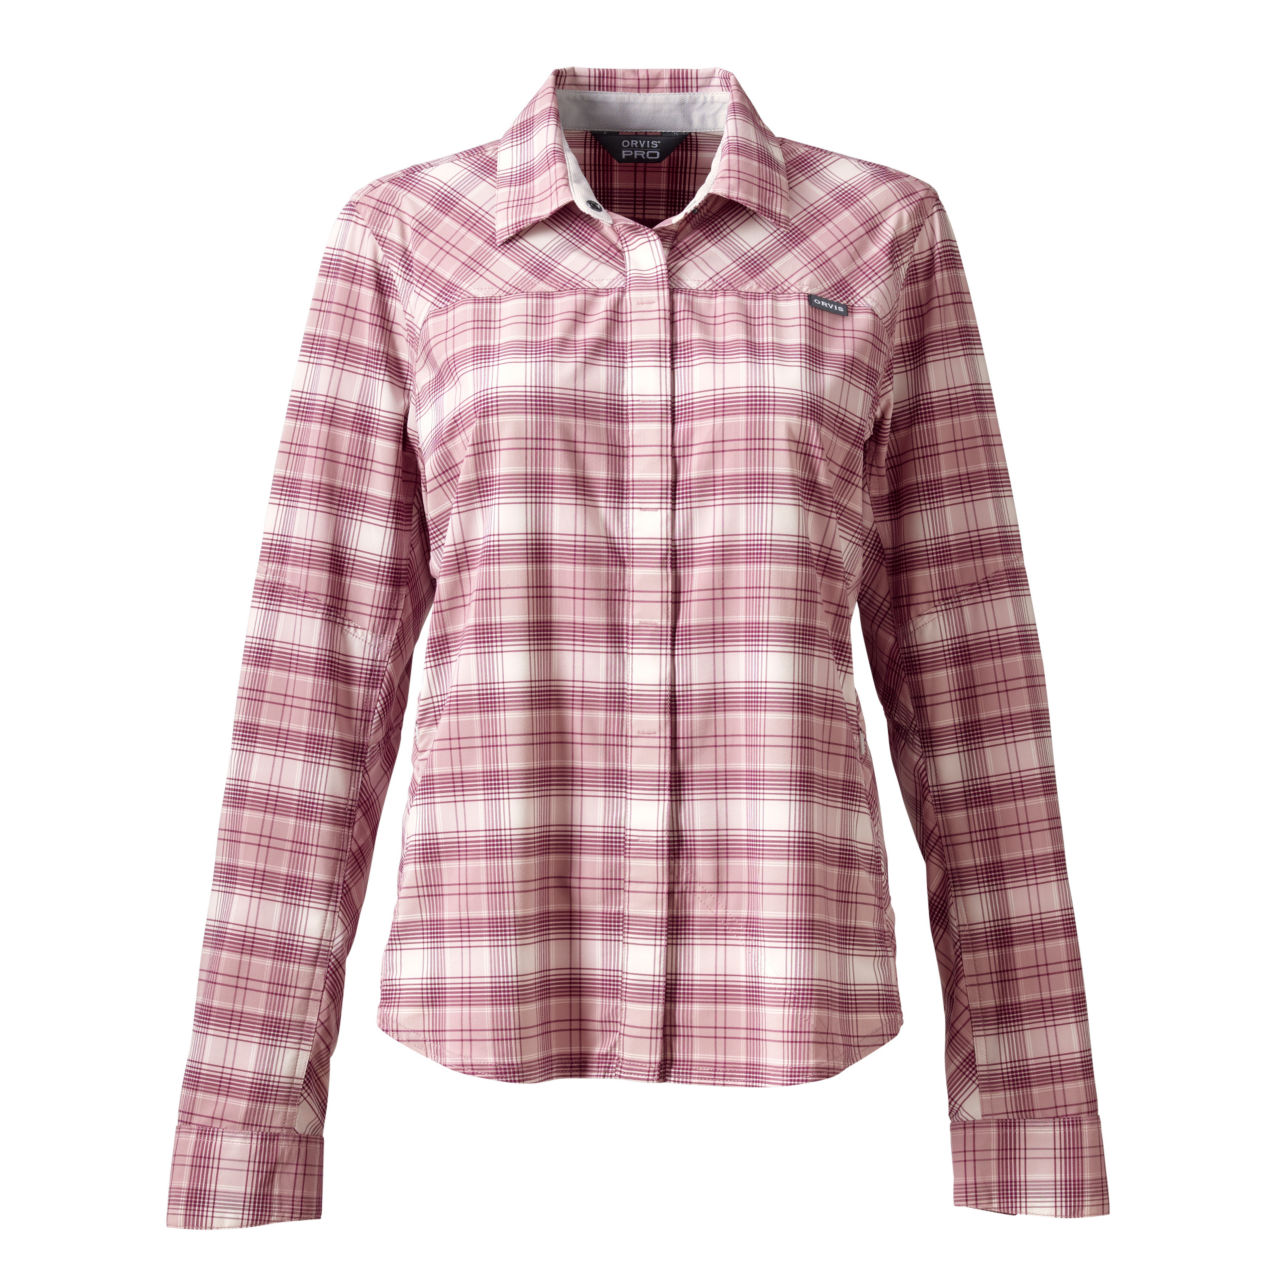 Women’s PRO Stretch Long-Sleeved Shirt - LILAC PLAID image number 4